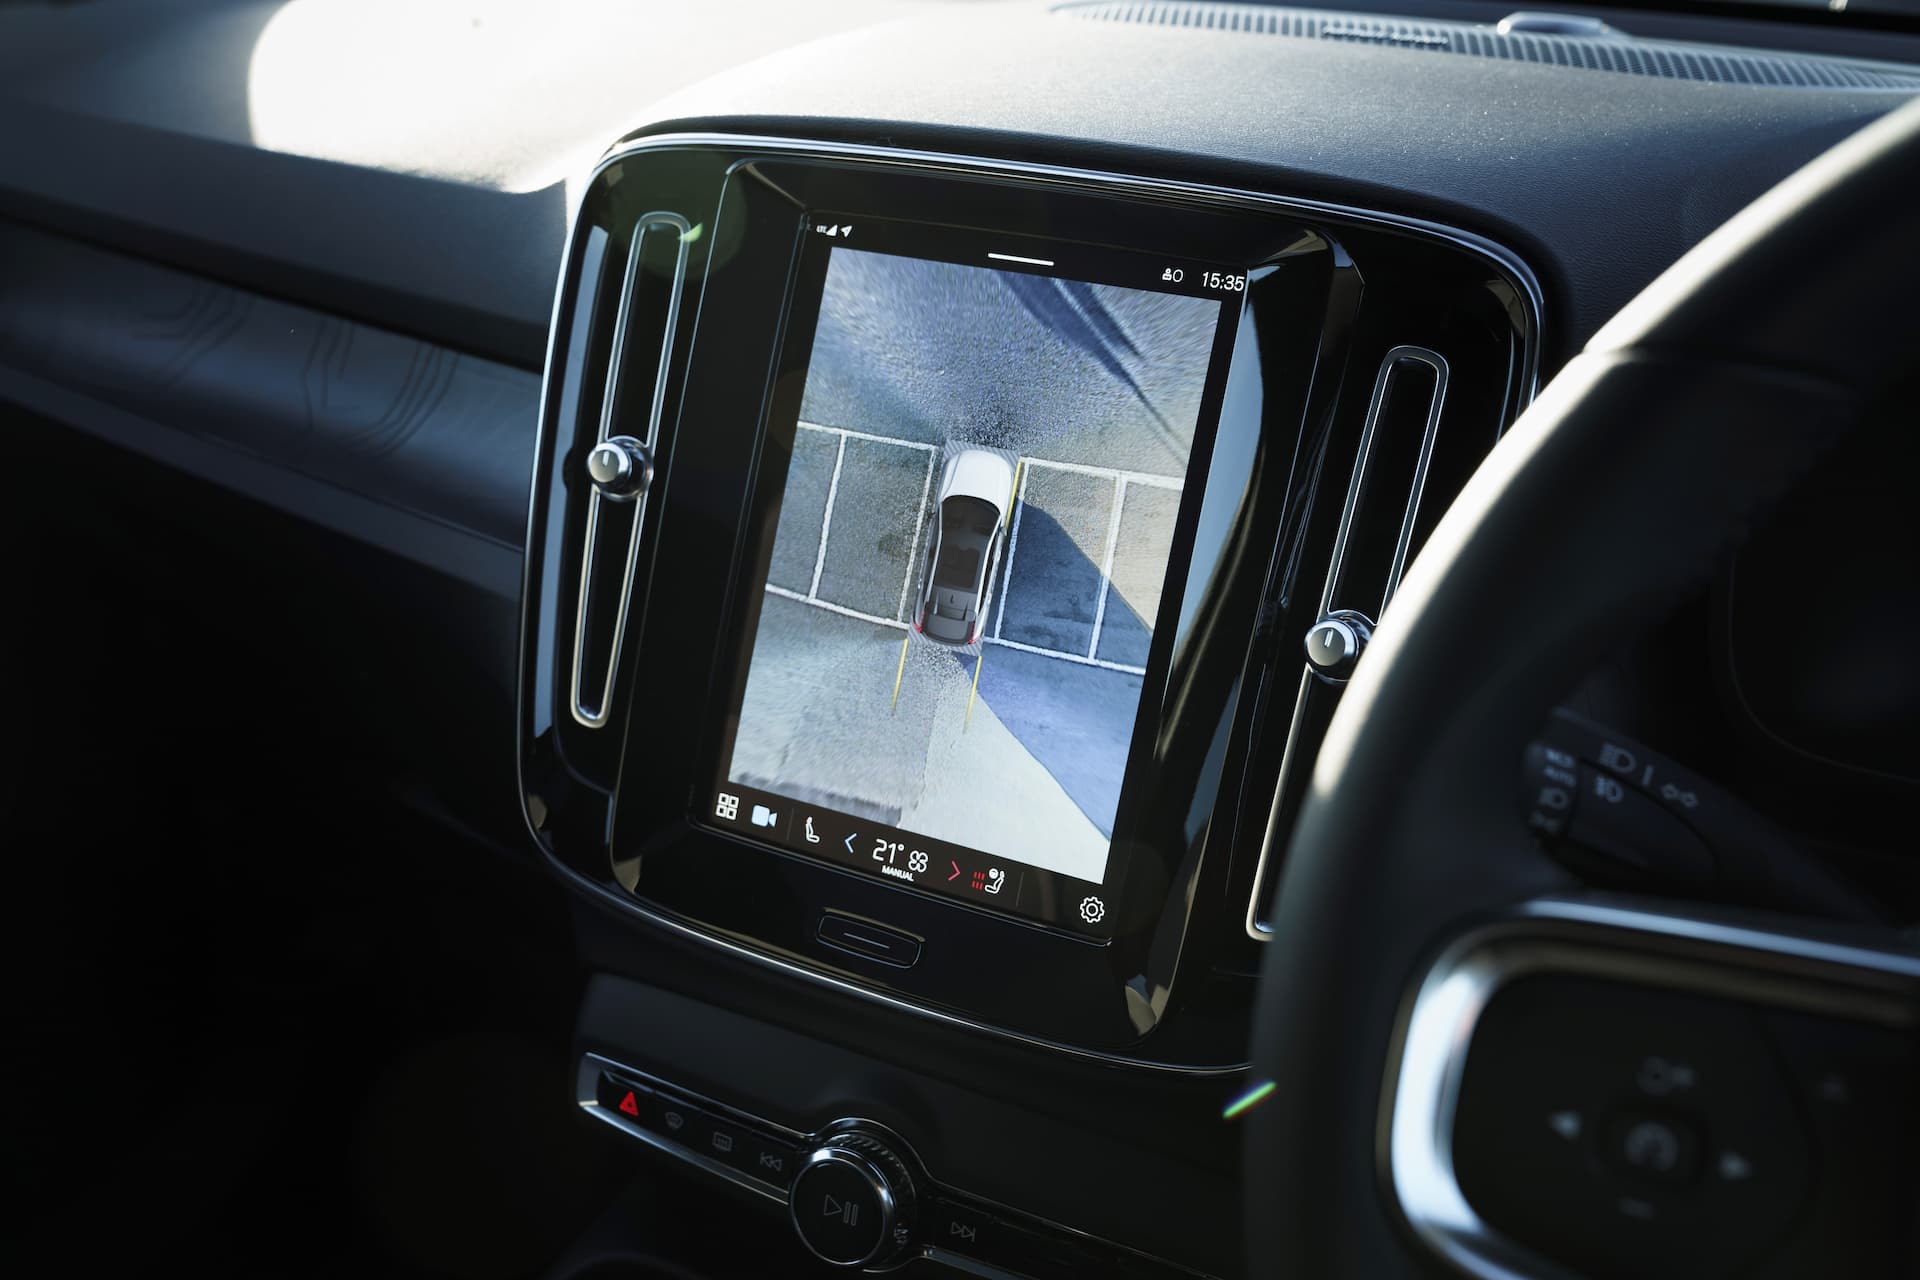 Volvo C40 Recharge touchscreen showing 360-degree camera view